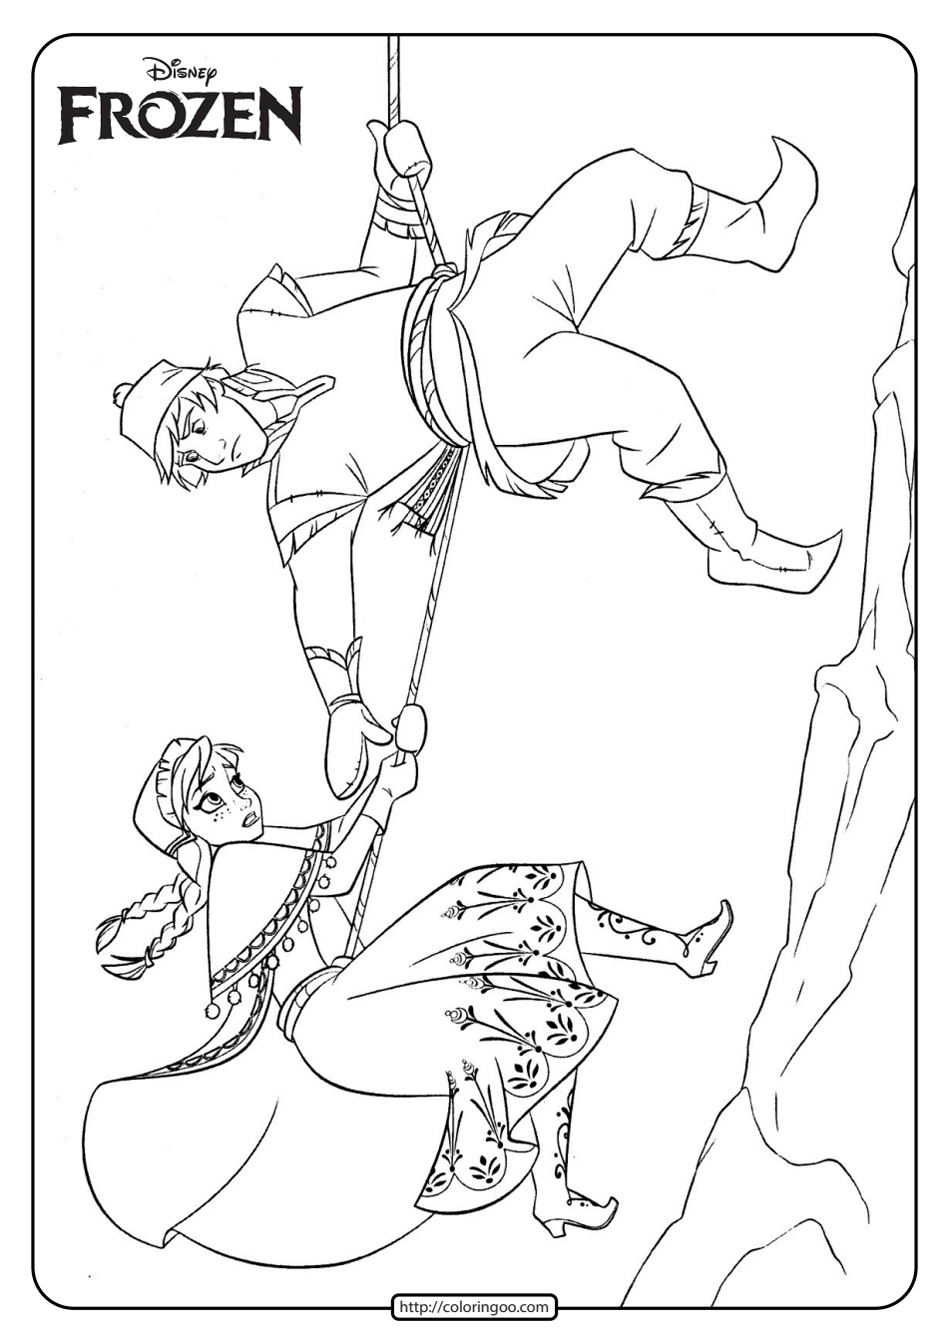 disney frozen anna and kristoff coloring pages 02